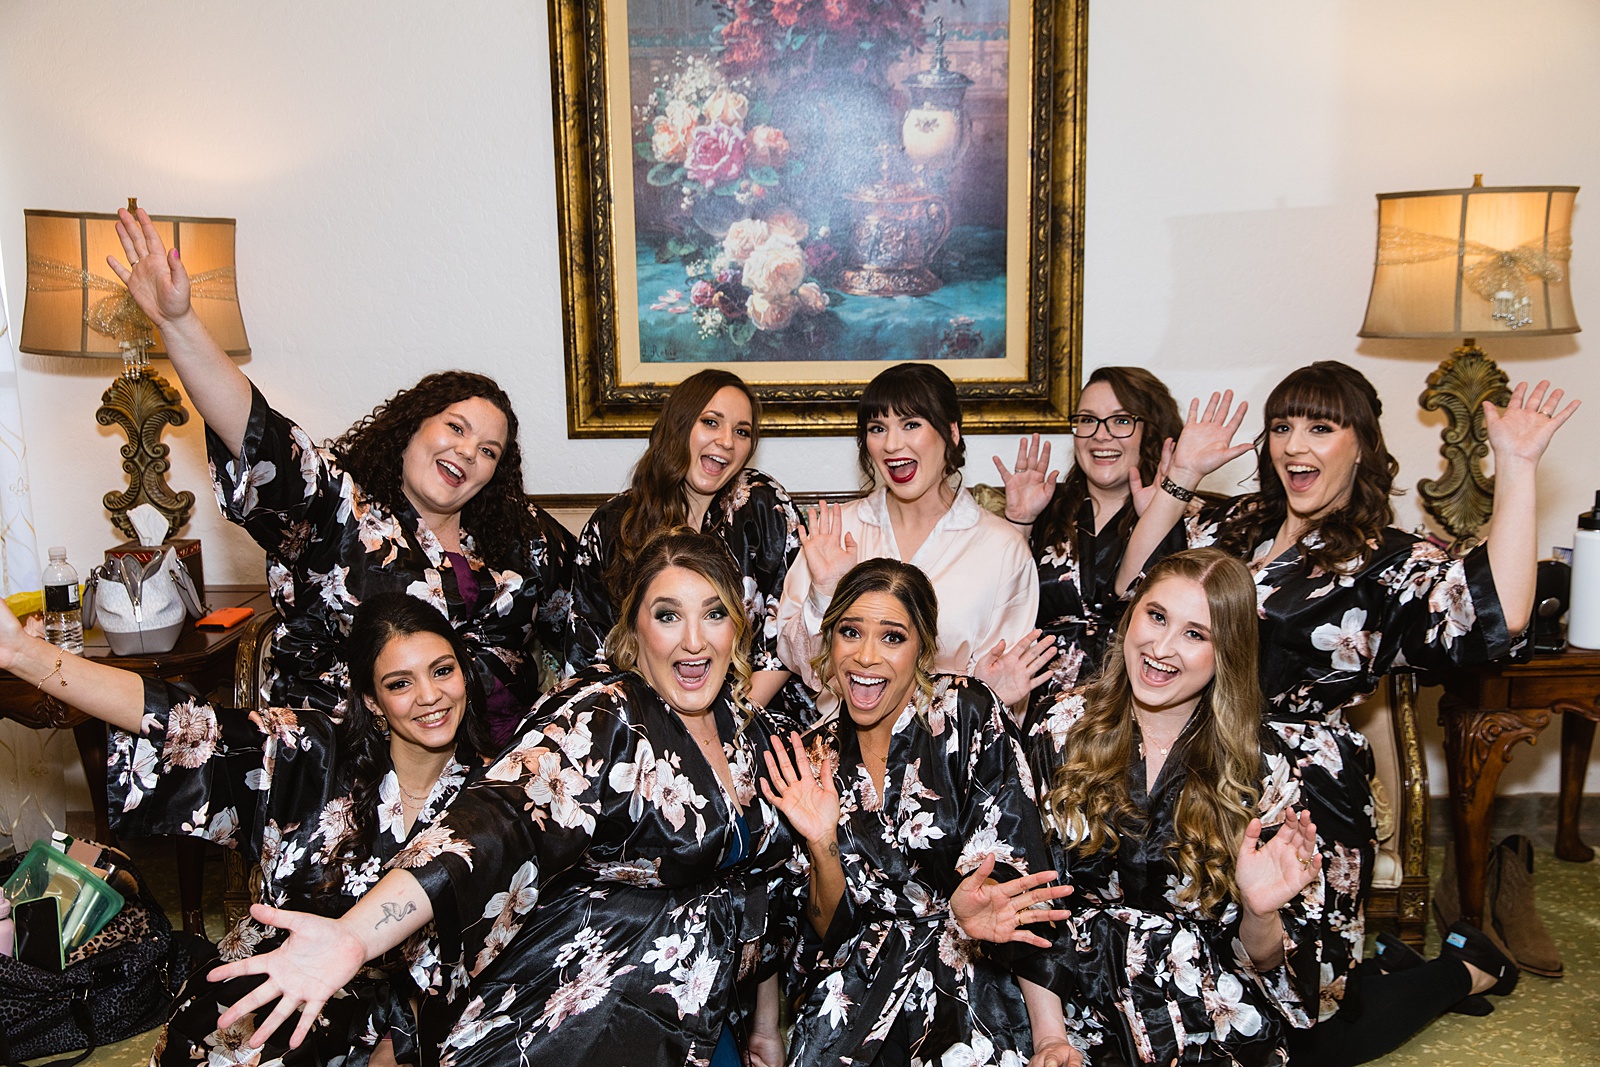 Bride having fun with bridesmaids in their matching satin robes by Chandler wedding photographer PMA Photography.